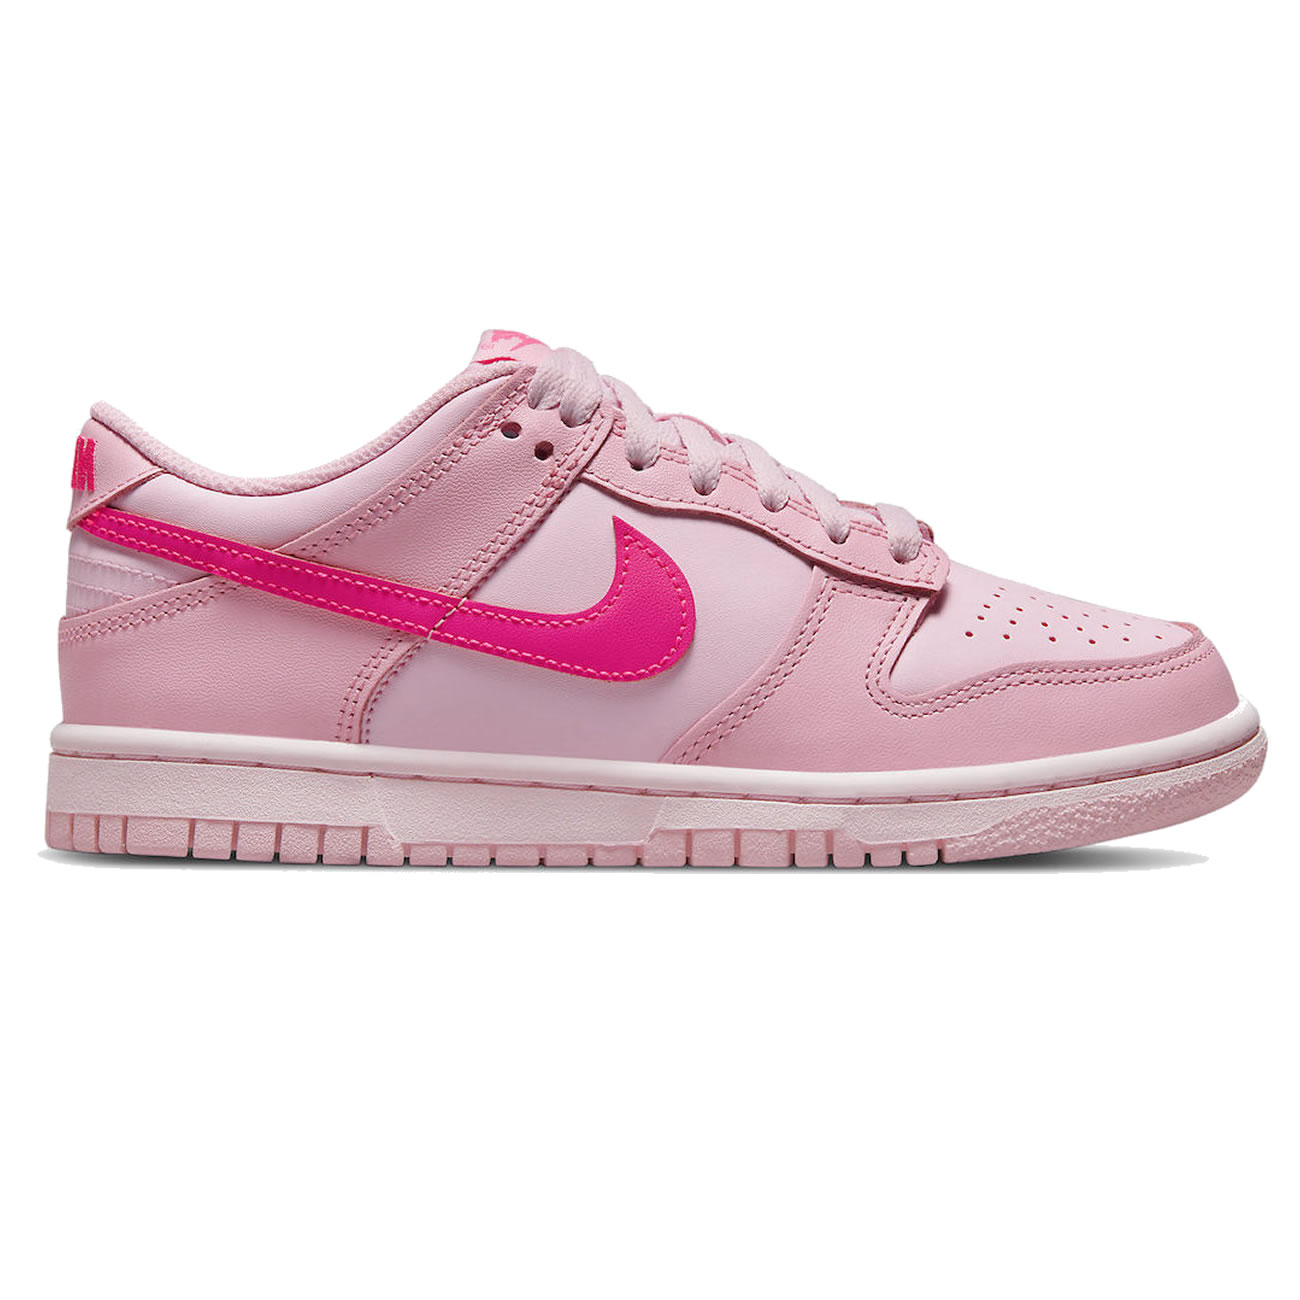 Nike Dunk Low Triple Pink Gs Dh9765 600 (2) - newkick.org